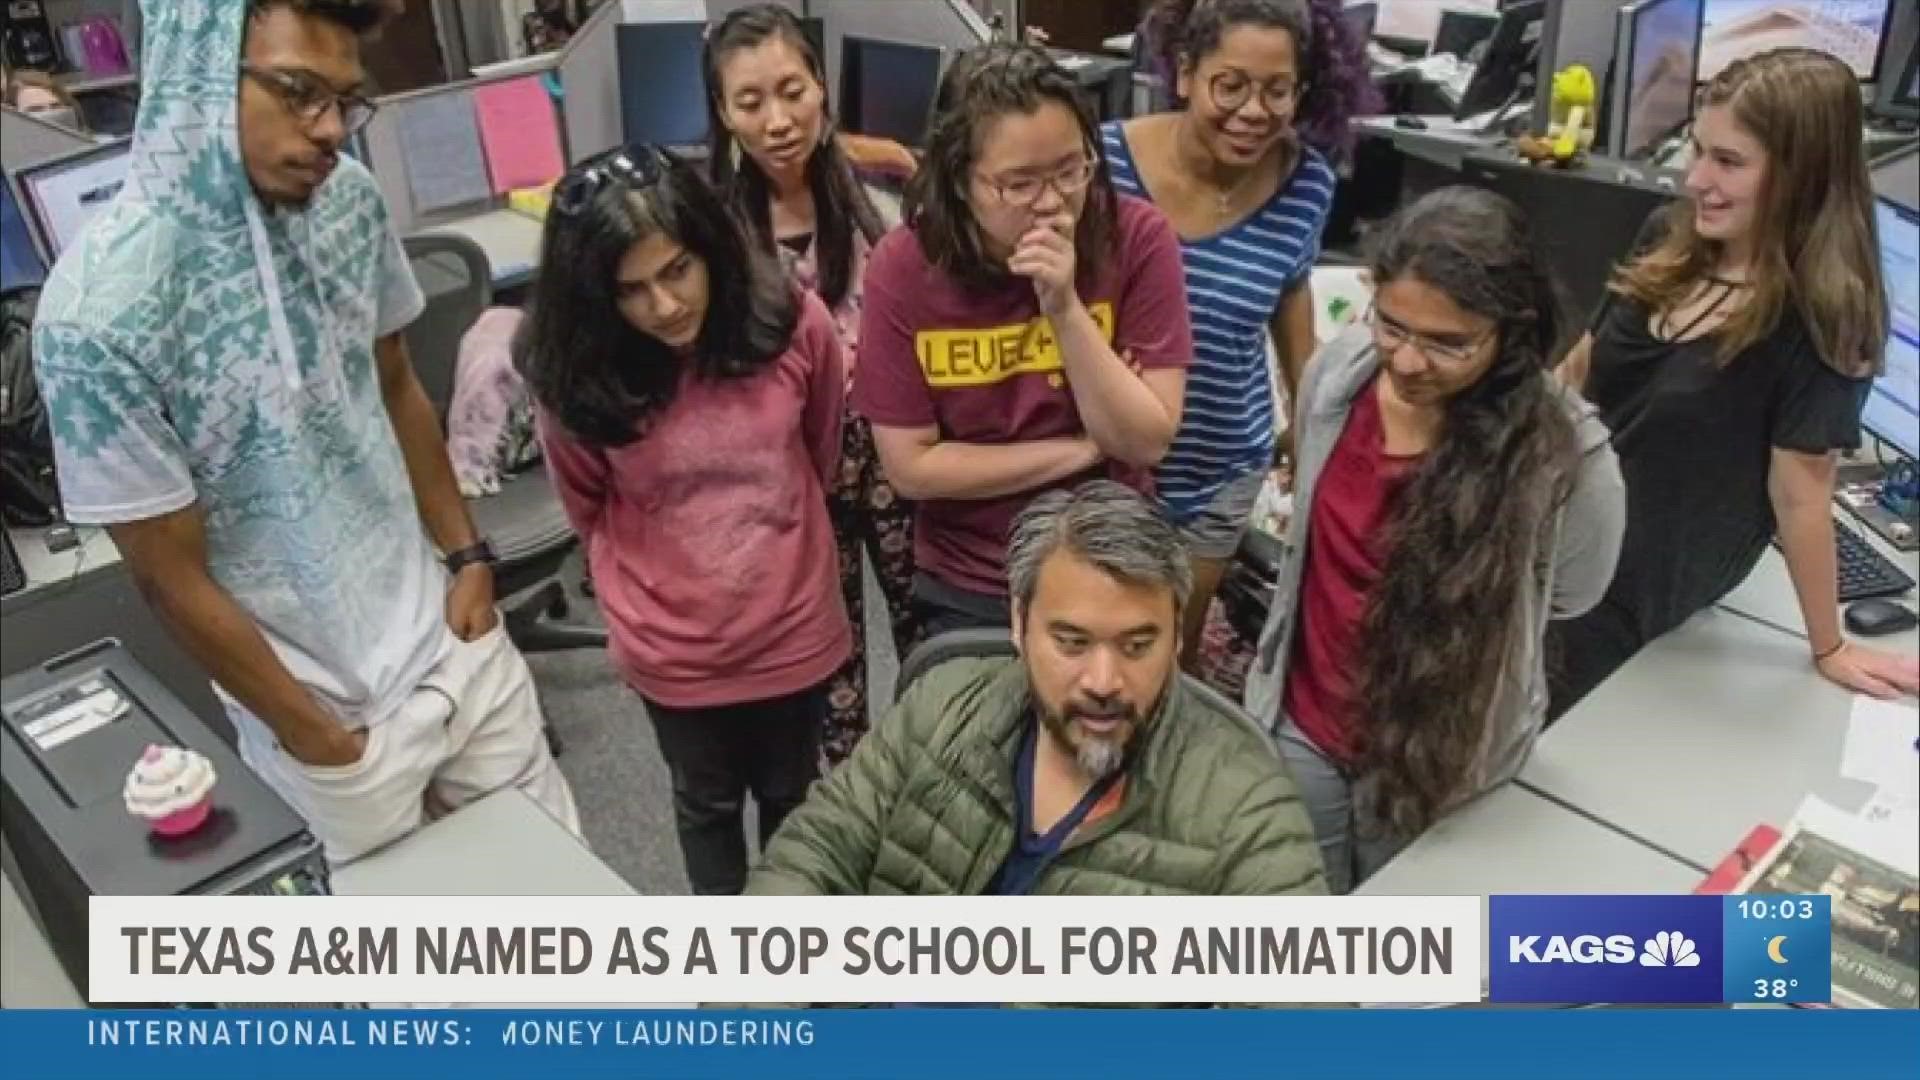 The Visualization program at Texas A&M University is starting the new year as one of the best in the state and the entire country for animation.